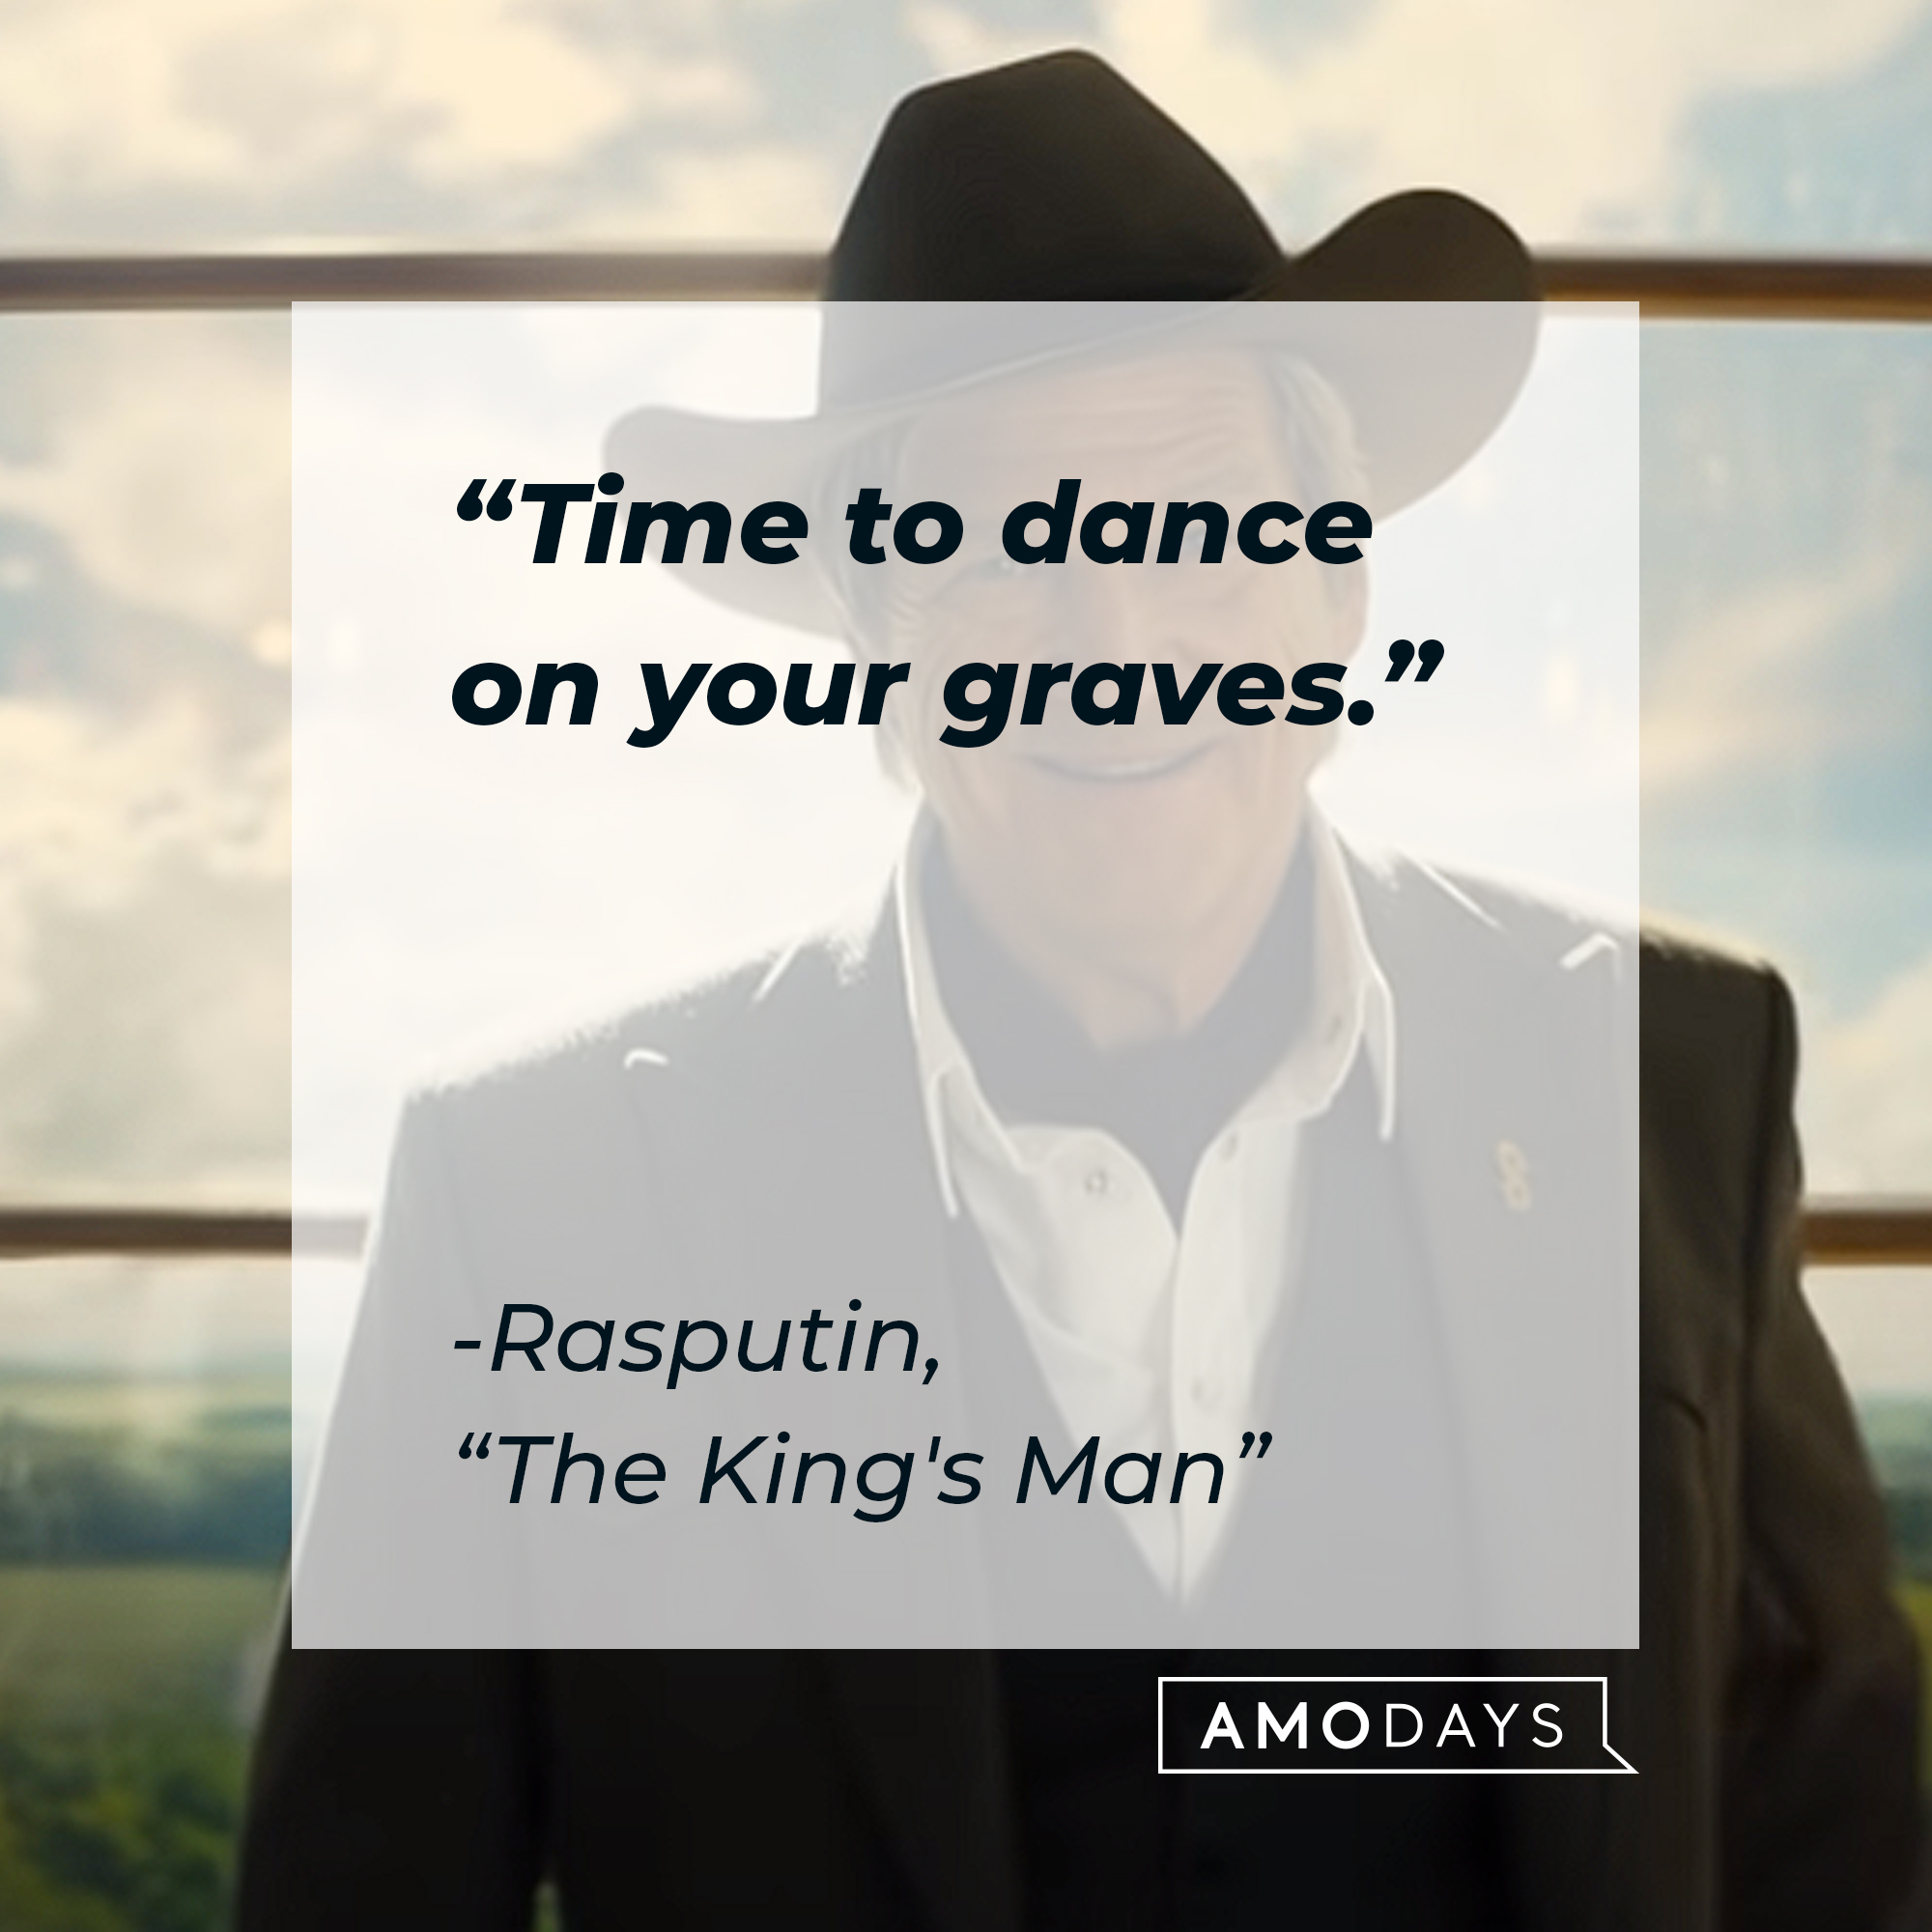 Rasputin's quote, The King's Man: "Time to dance on your graves" | Image: YouTube / 20thCenturyStudios